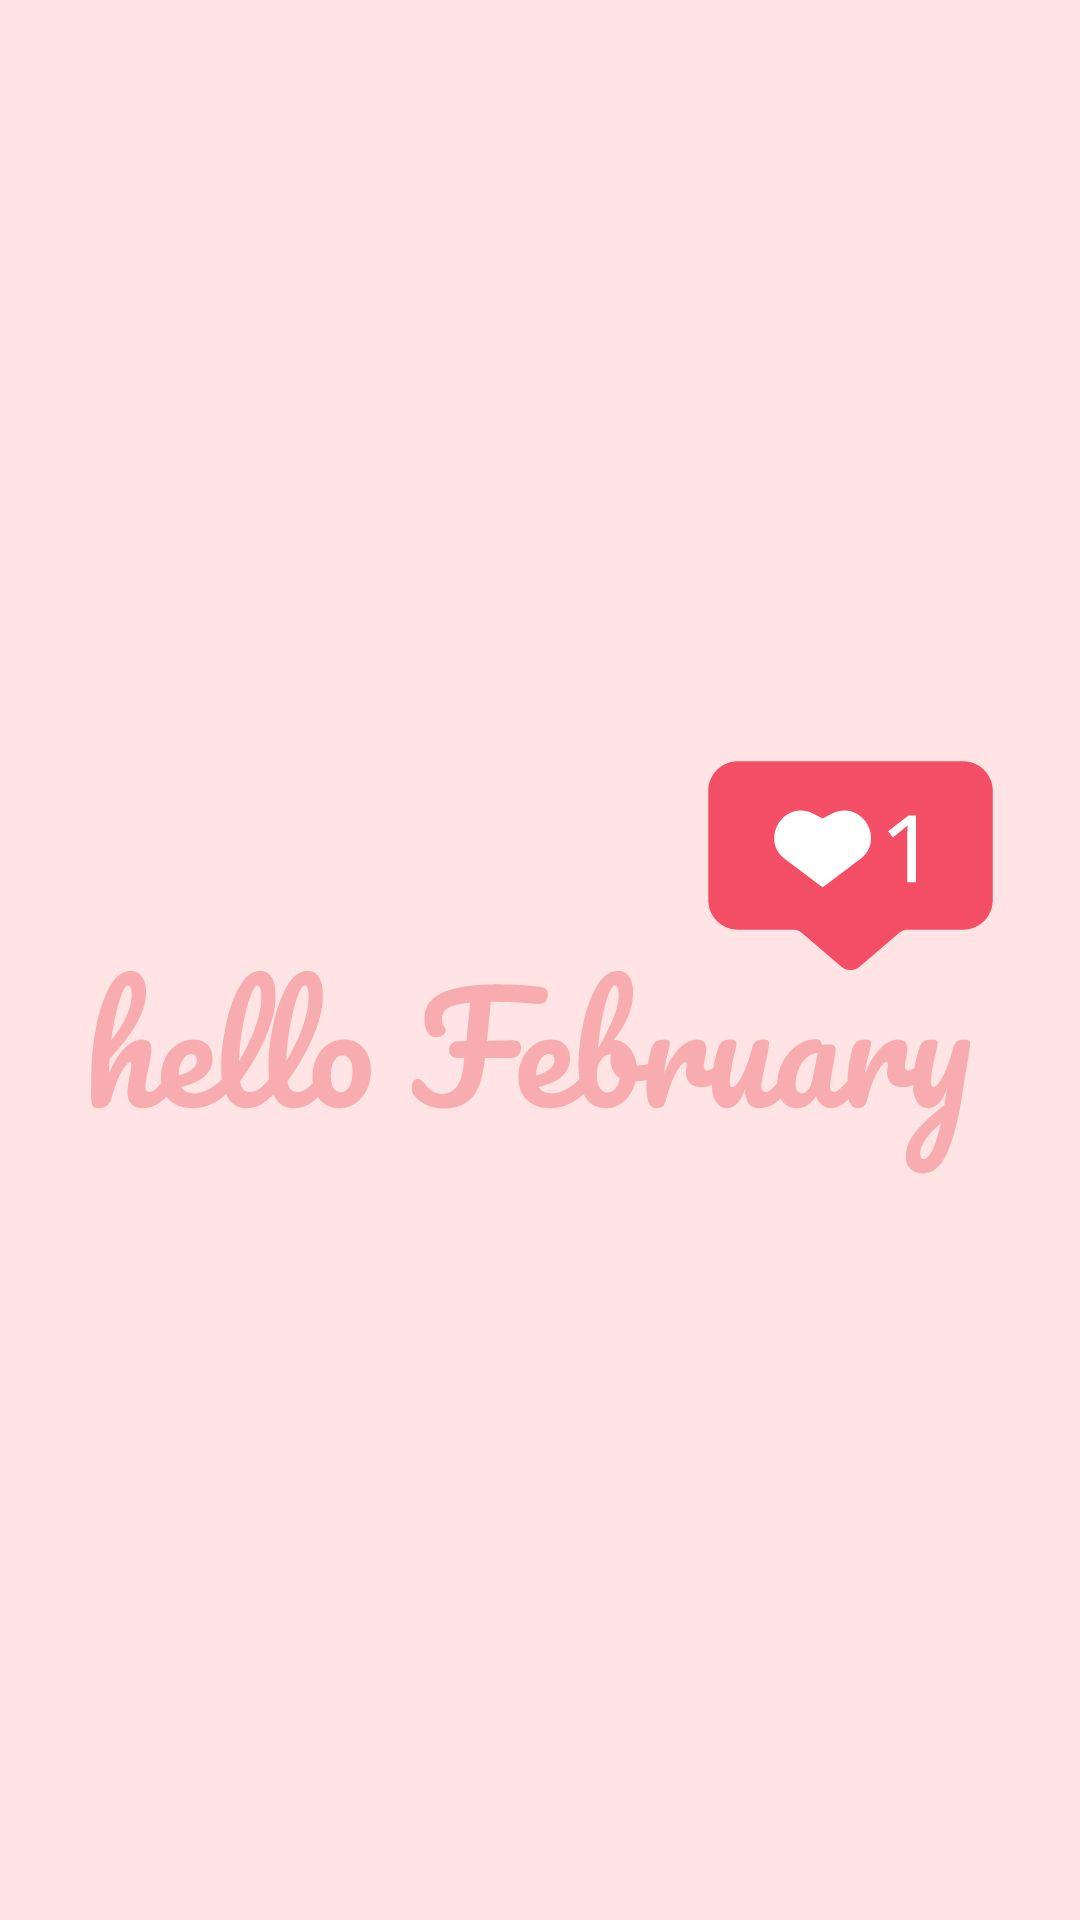 Hello February Valentines Day theme free wallpaper available